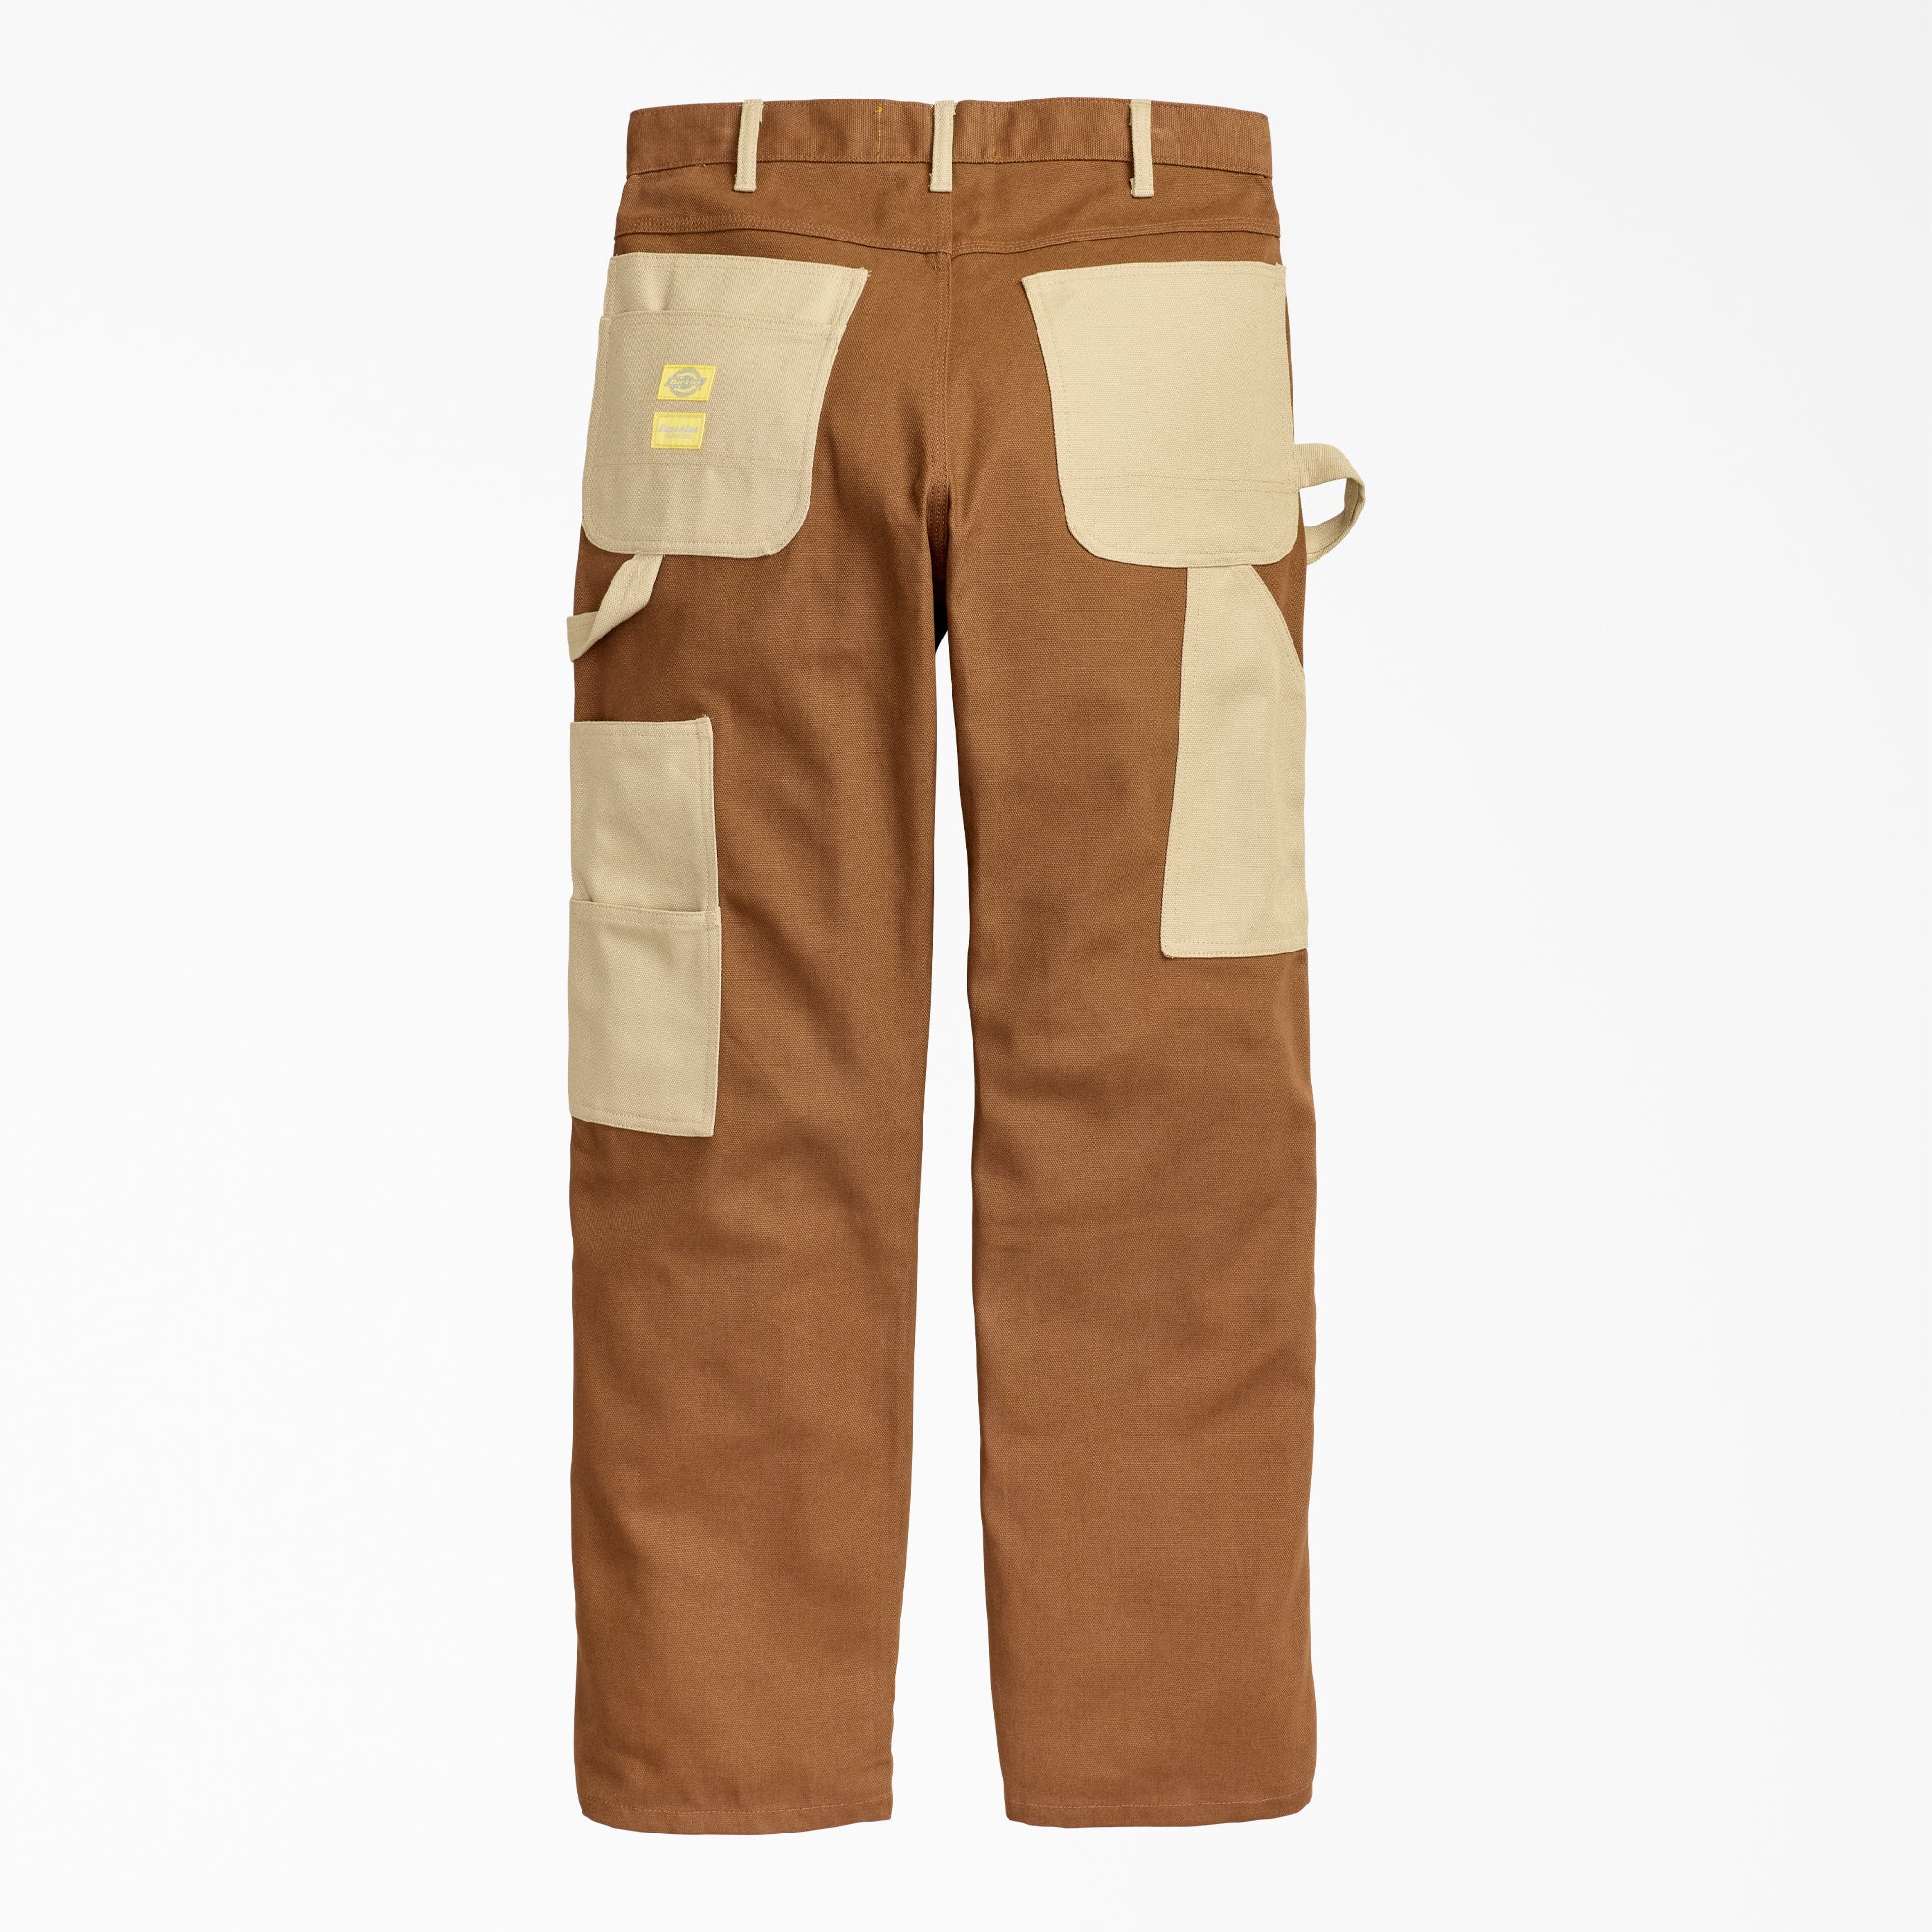 NYS X DICKIES 'SUN-DYED IN TEXAS' DUCK UTILITY PAINTER PANT - DESERT SAND